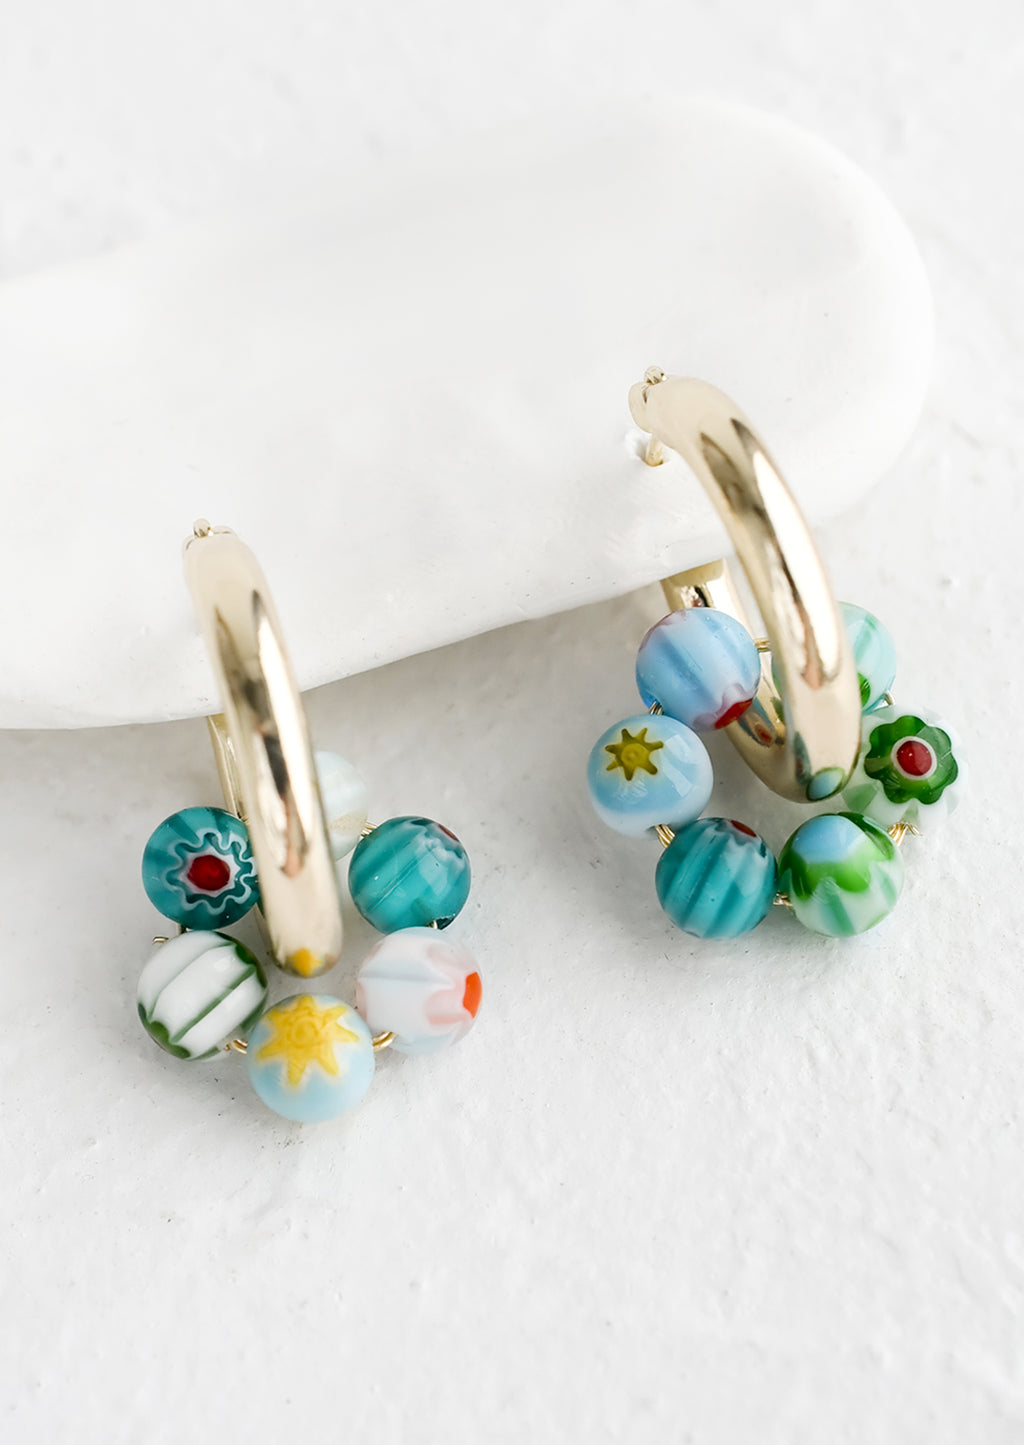 Turquoise Multi: A pair of gold hoop earrings with turquoise millefiore glass beads.